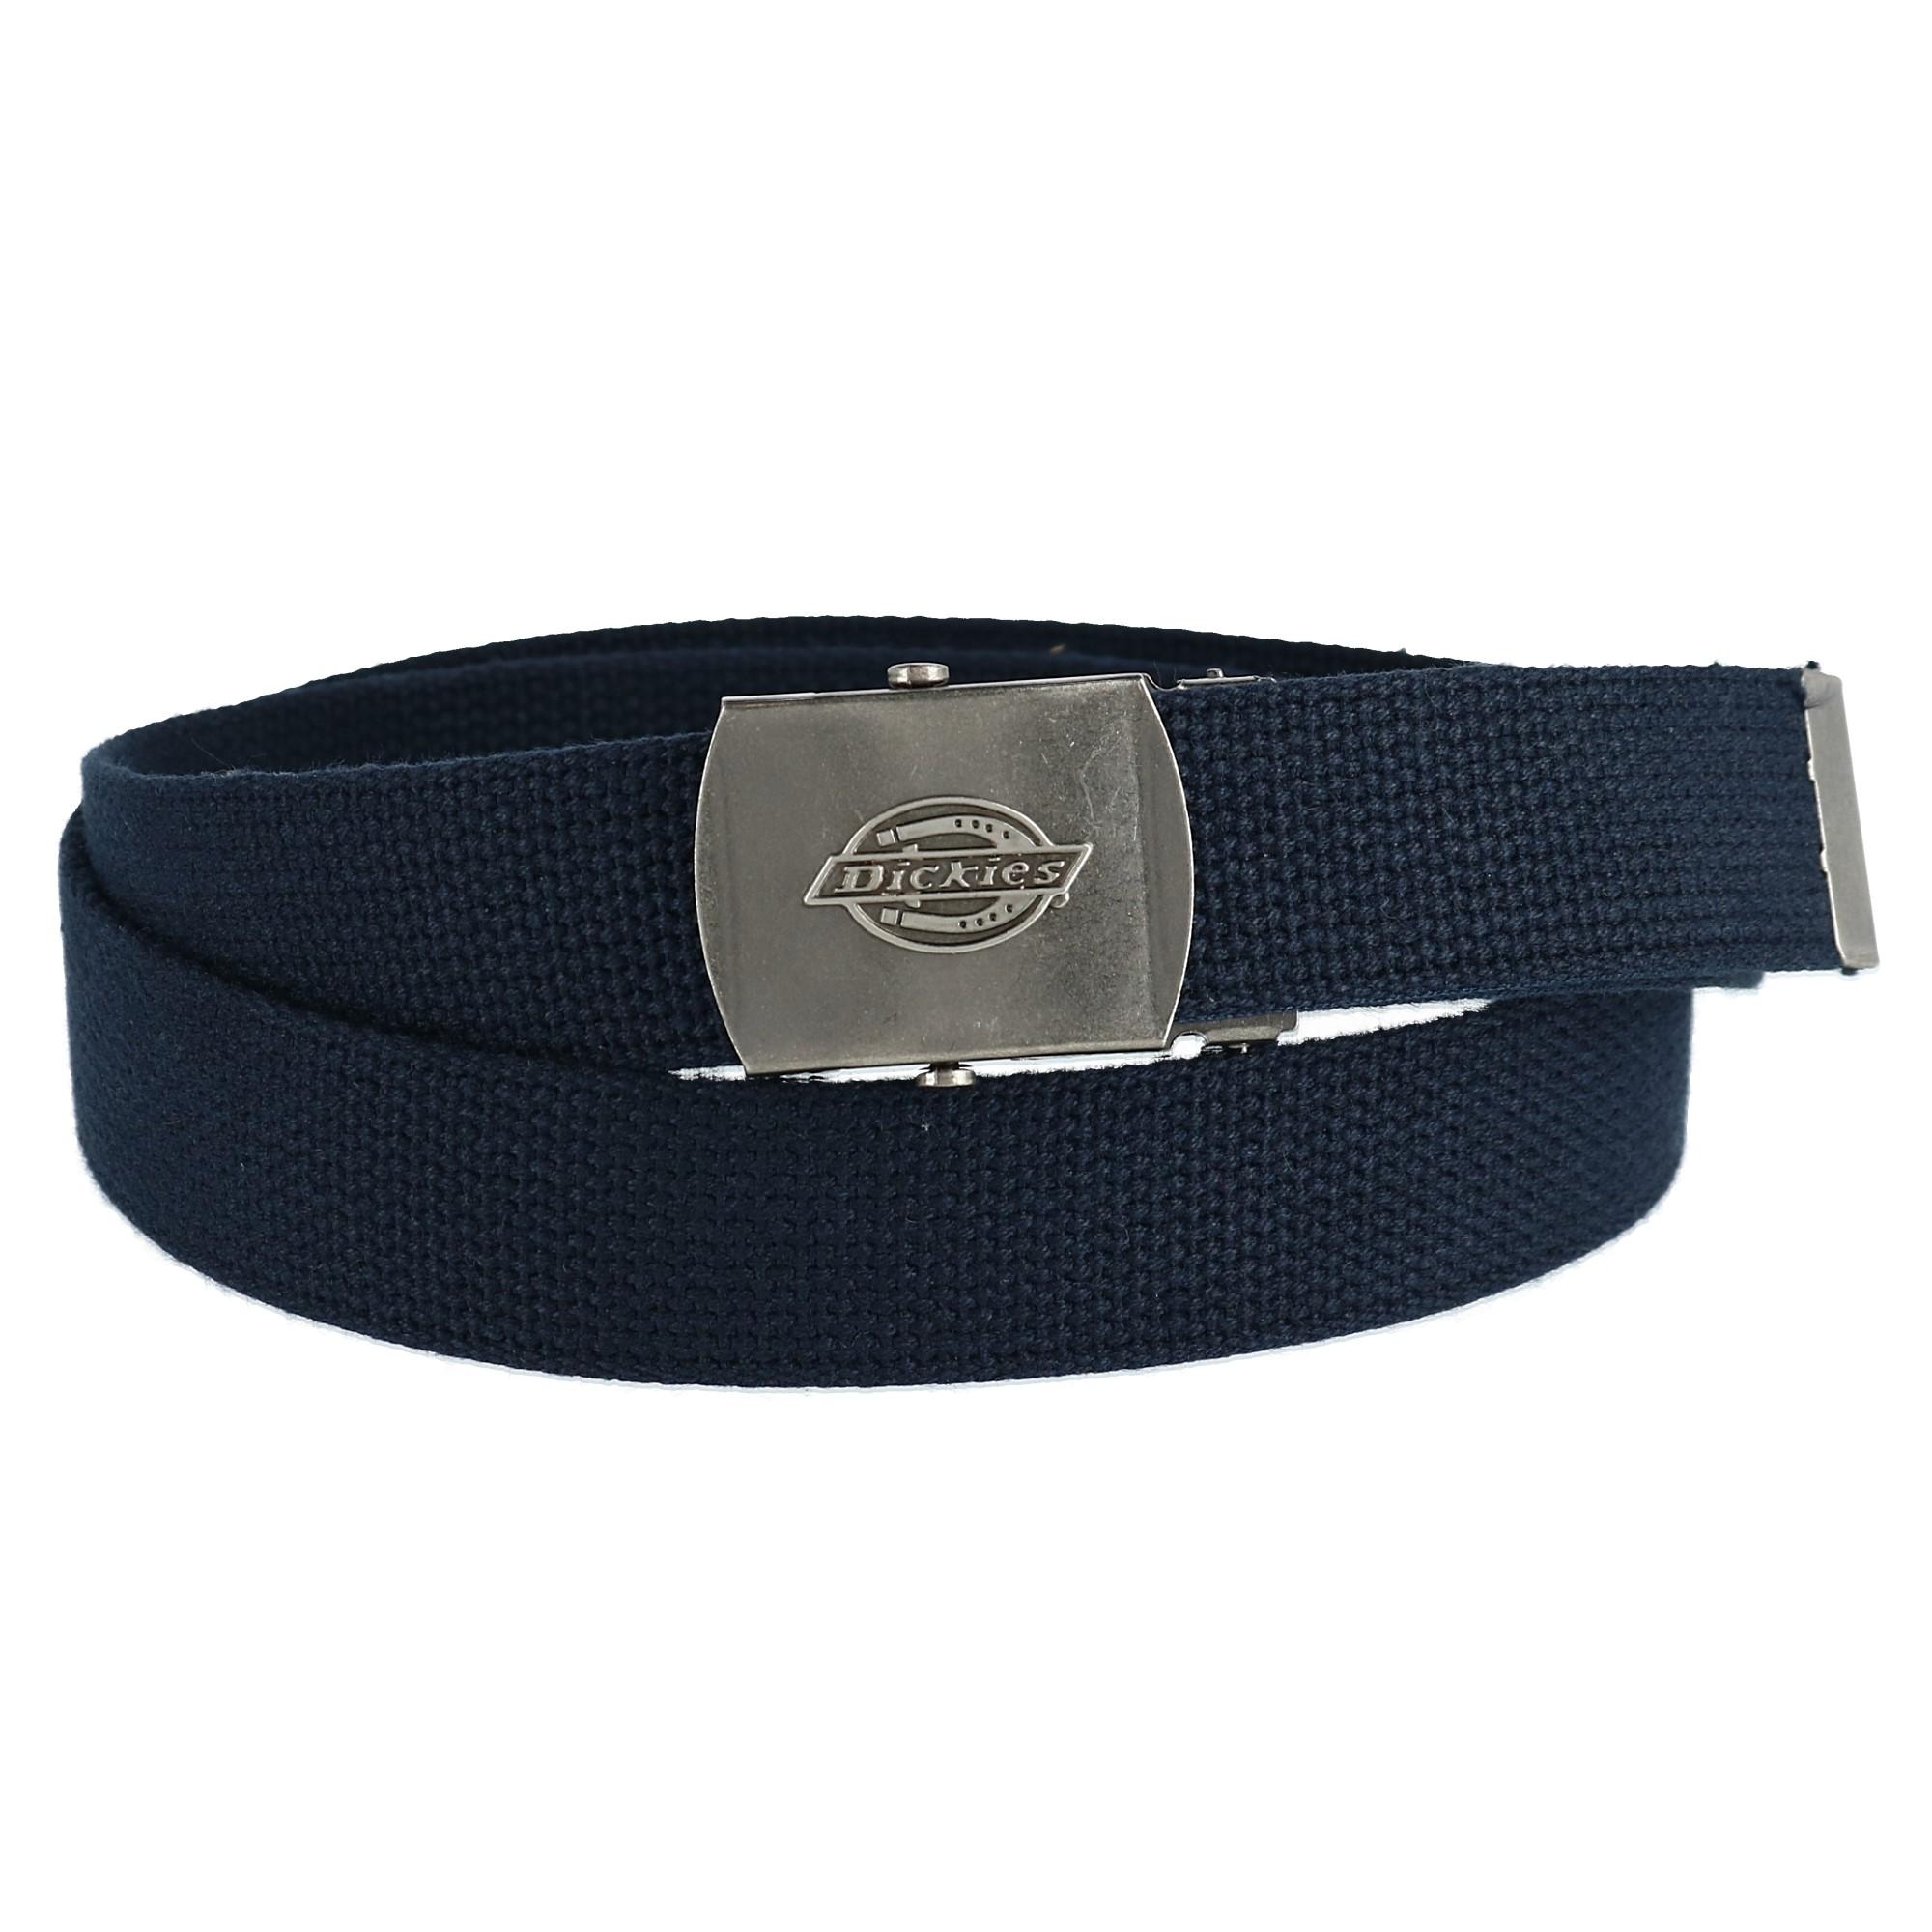 Dickies Men's Adjustable Fabric Belt with Military Buckle